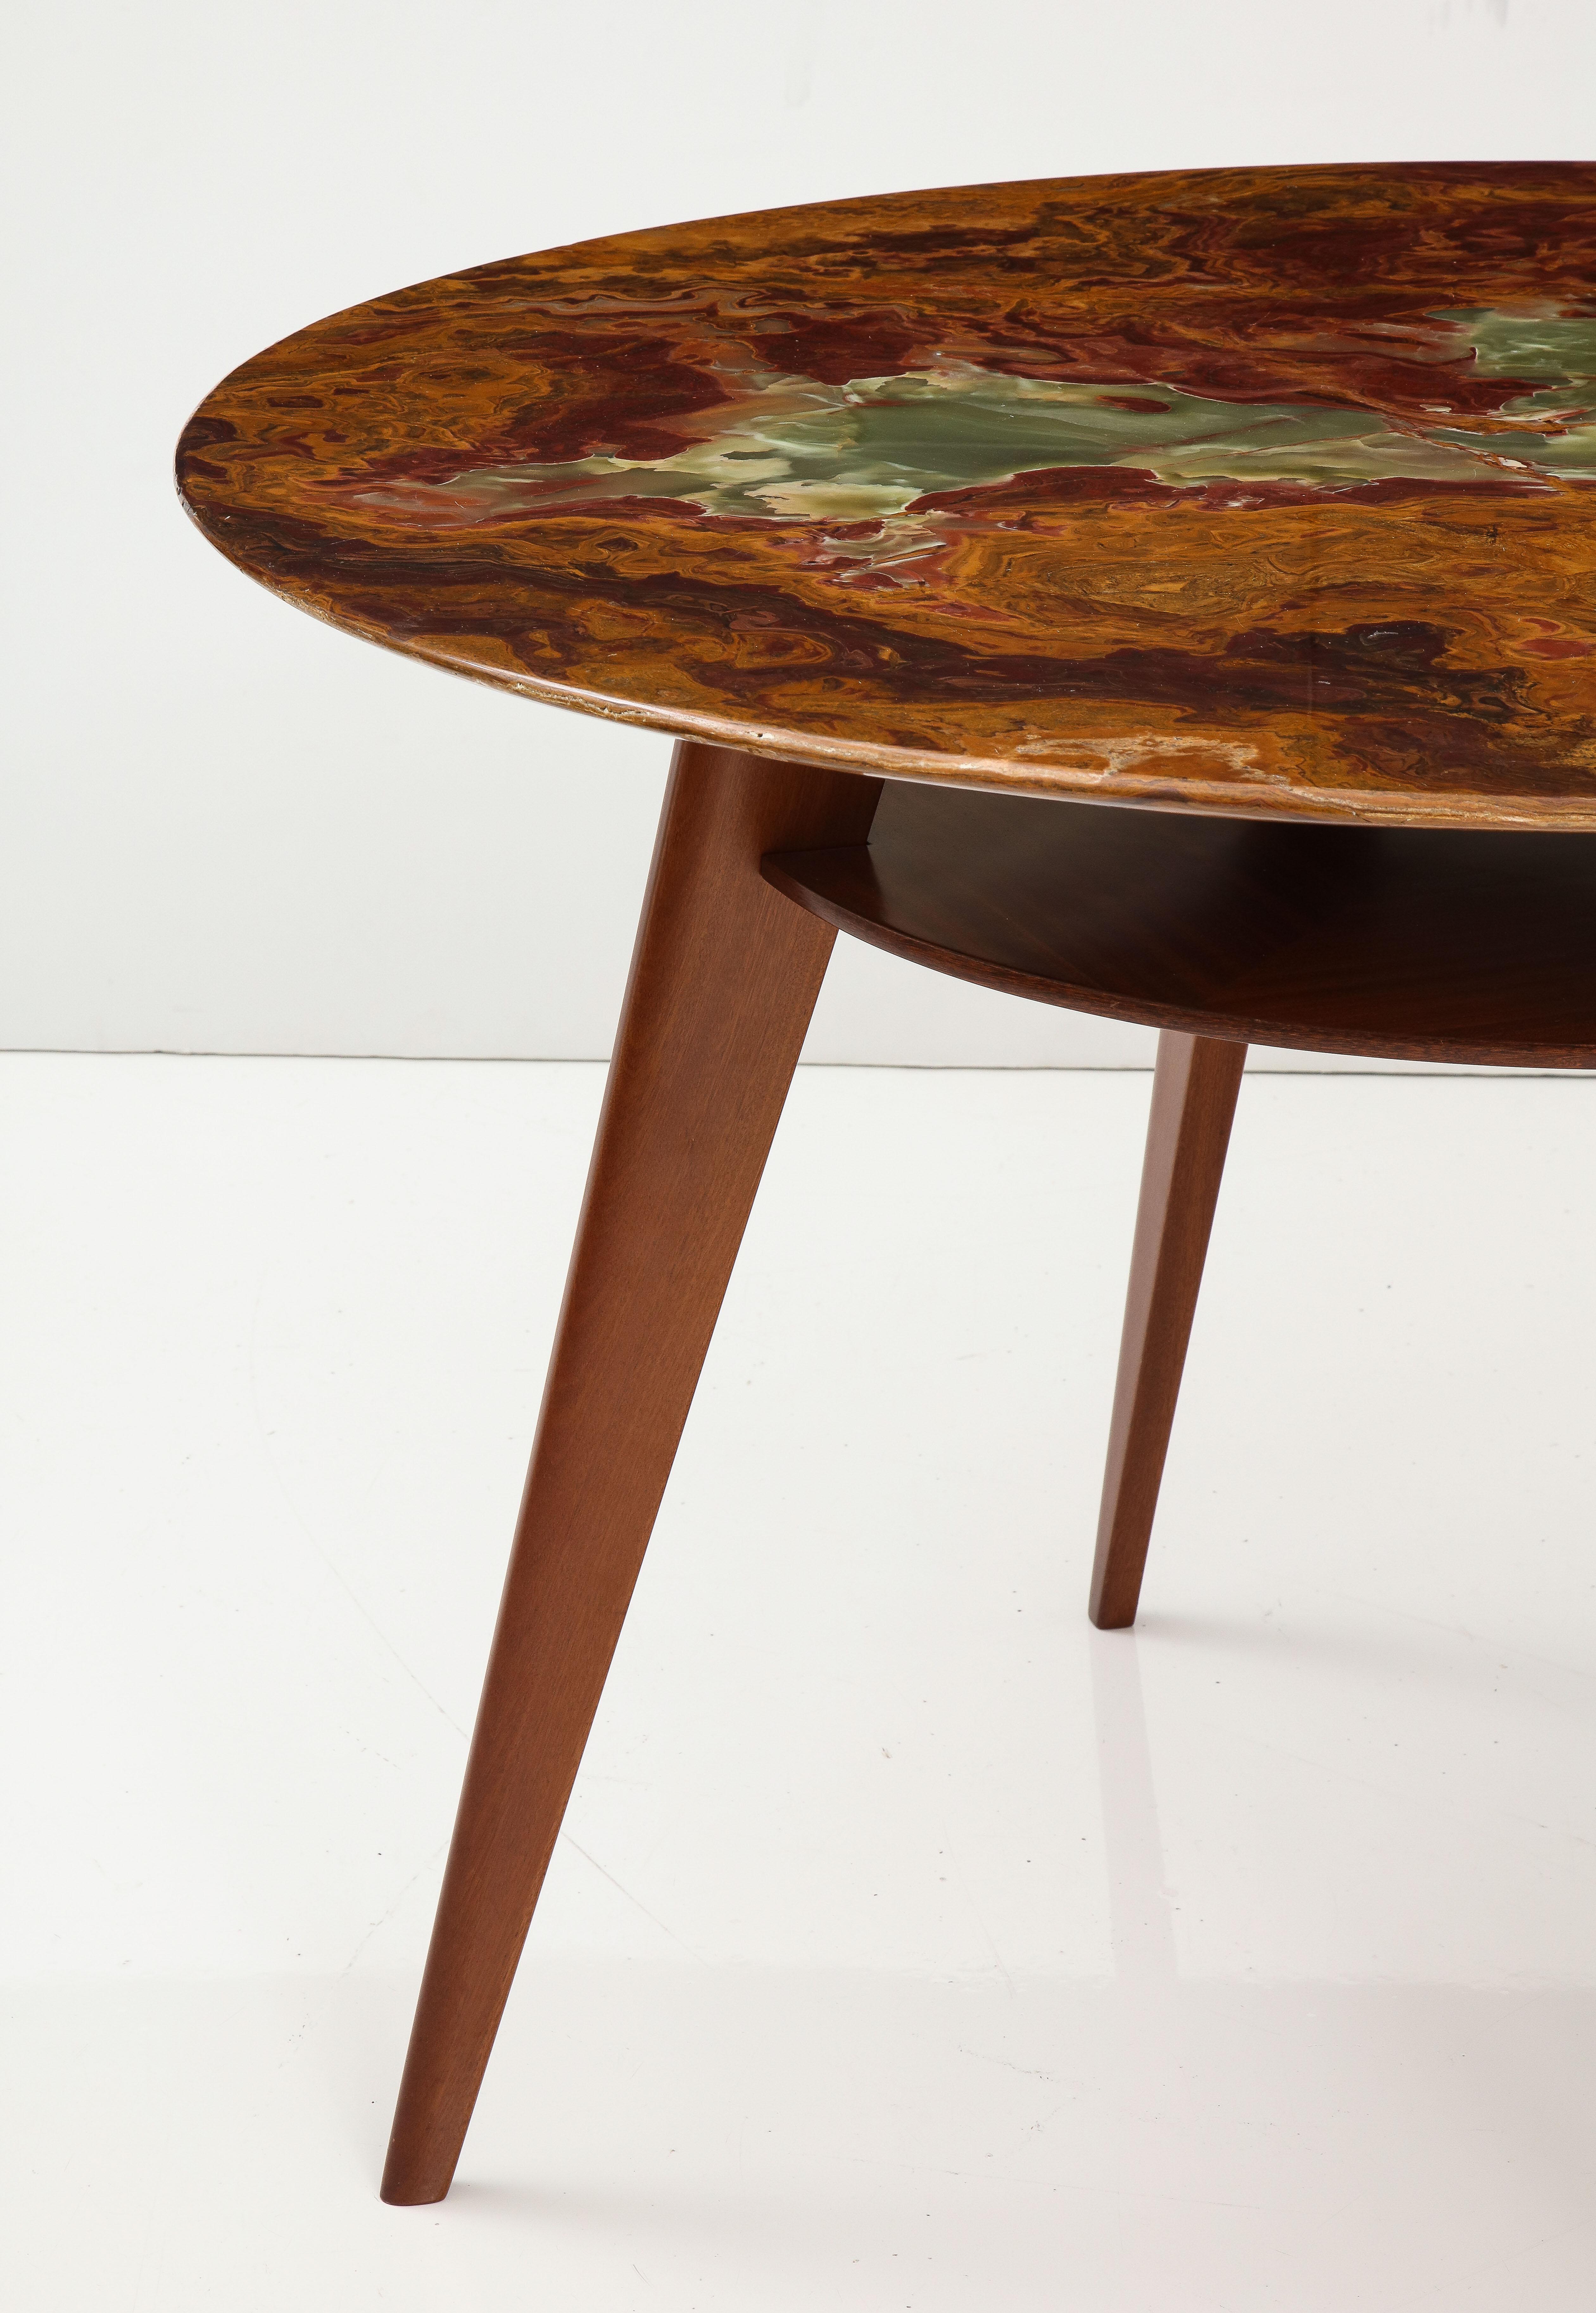 20th Century Center Entry Table in Mahogany and Onyx, circa 1950 For Sale